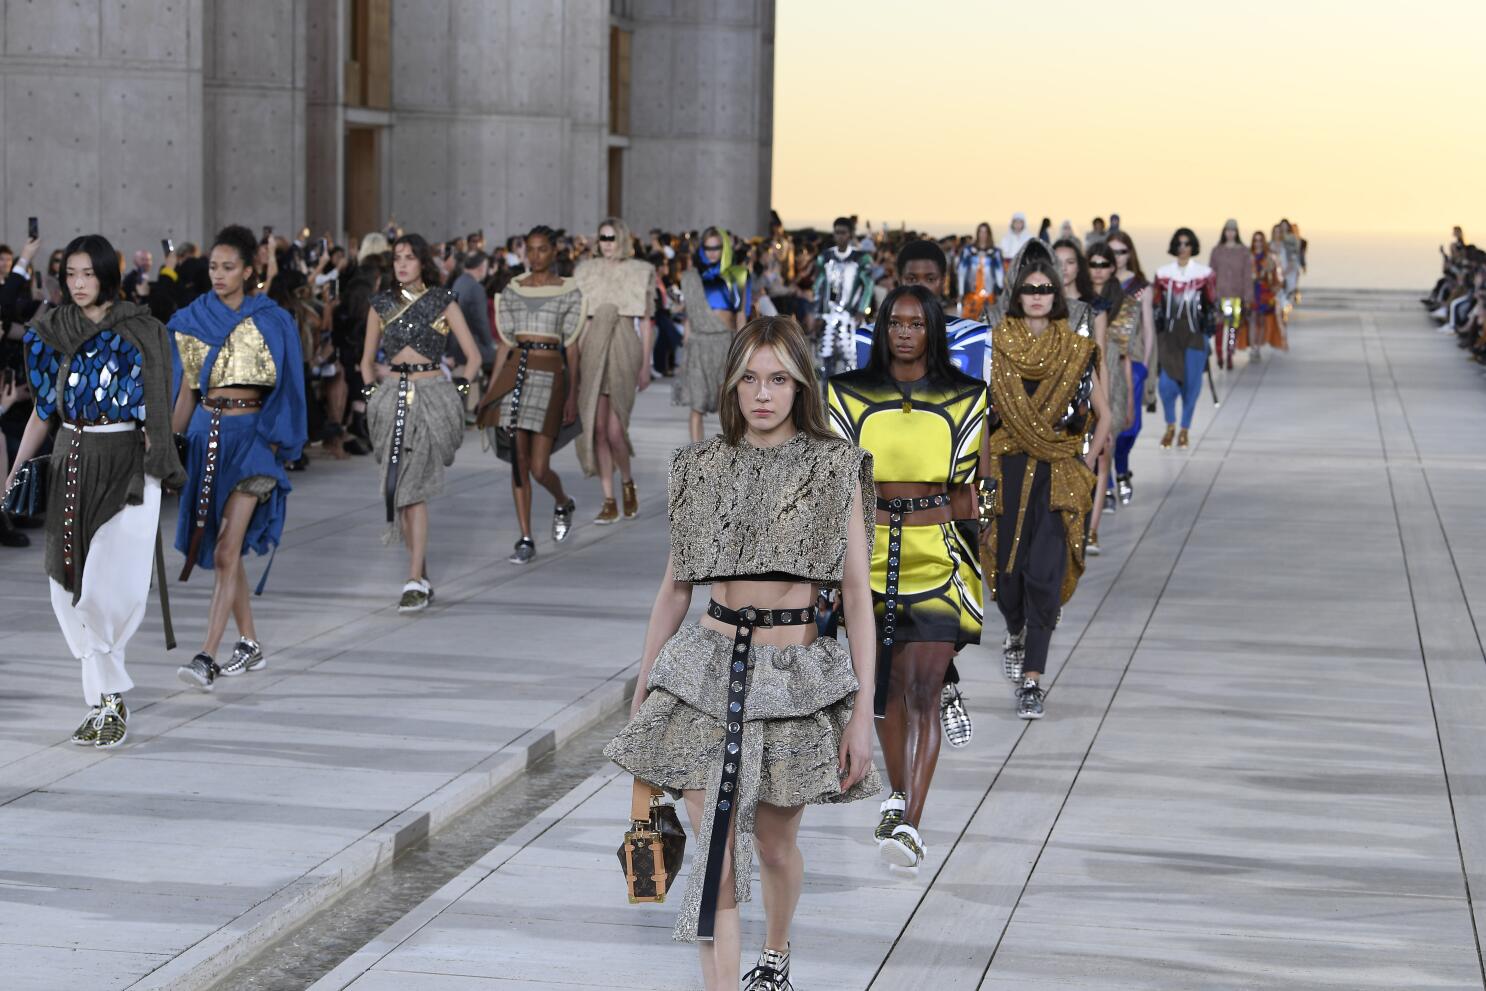 See All The Looks from LOUIS VUITTON Cruise 2022 Collection